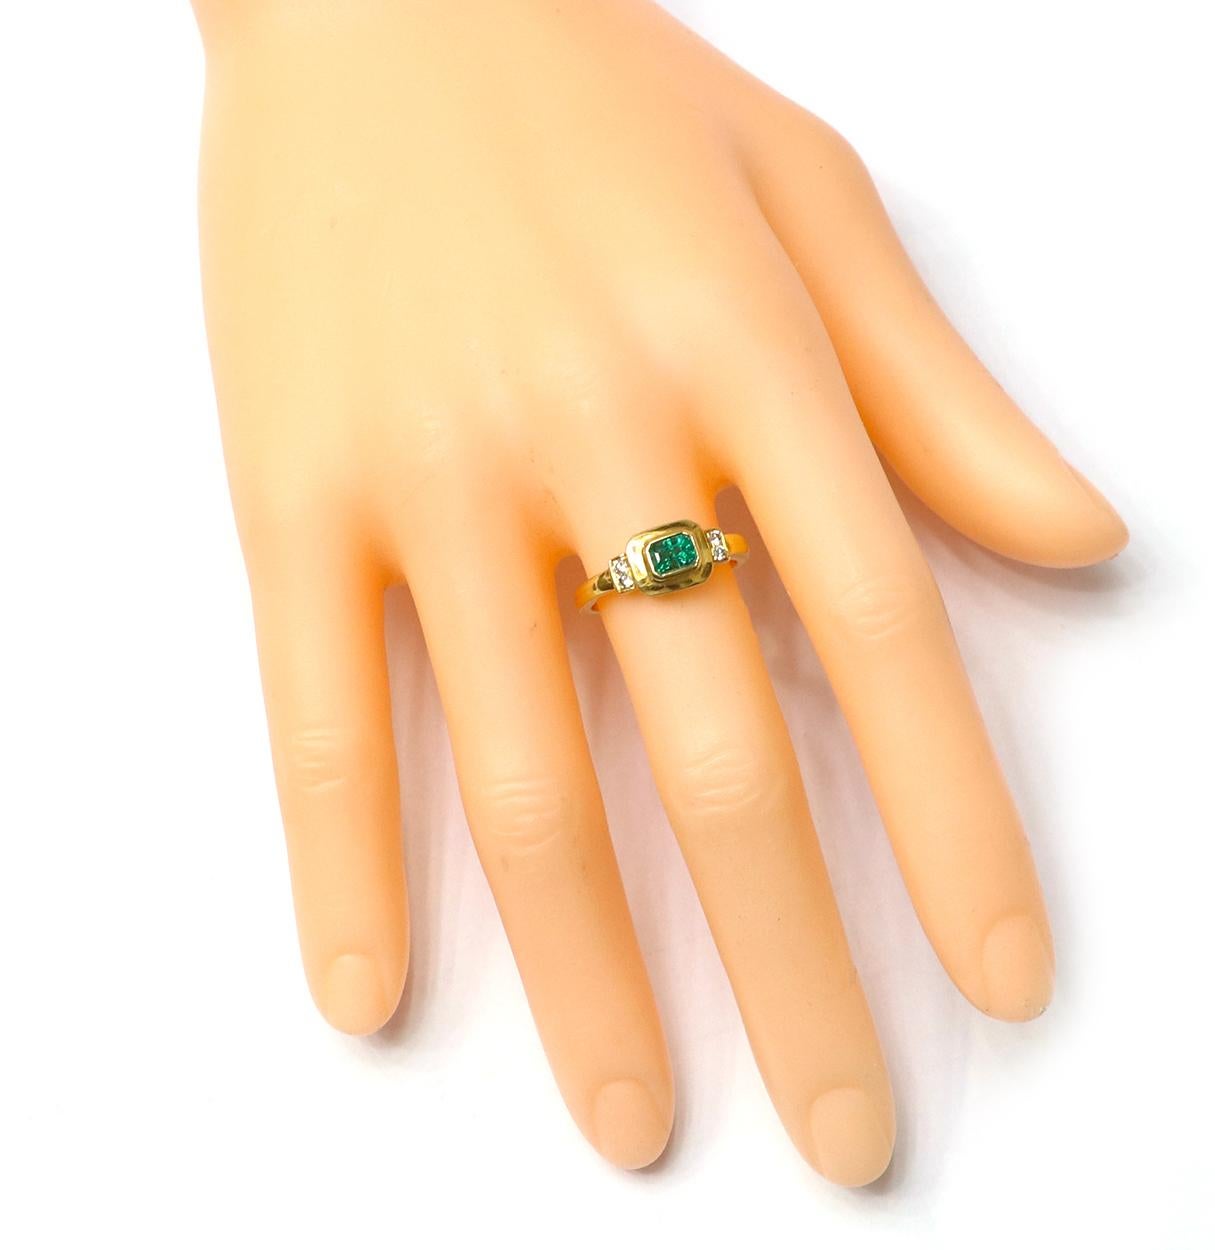 18 Karat Yellow Gold Natural Emerald and Diamond Art-Deco Style Ring

Drawing inspiration from royal heirlooms, this handcrafted ring is iconic. Featuring an emerald-cut, natural emerald encrusted in the center in a closed setting with Brilliant-Cut